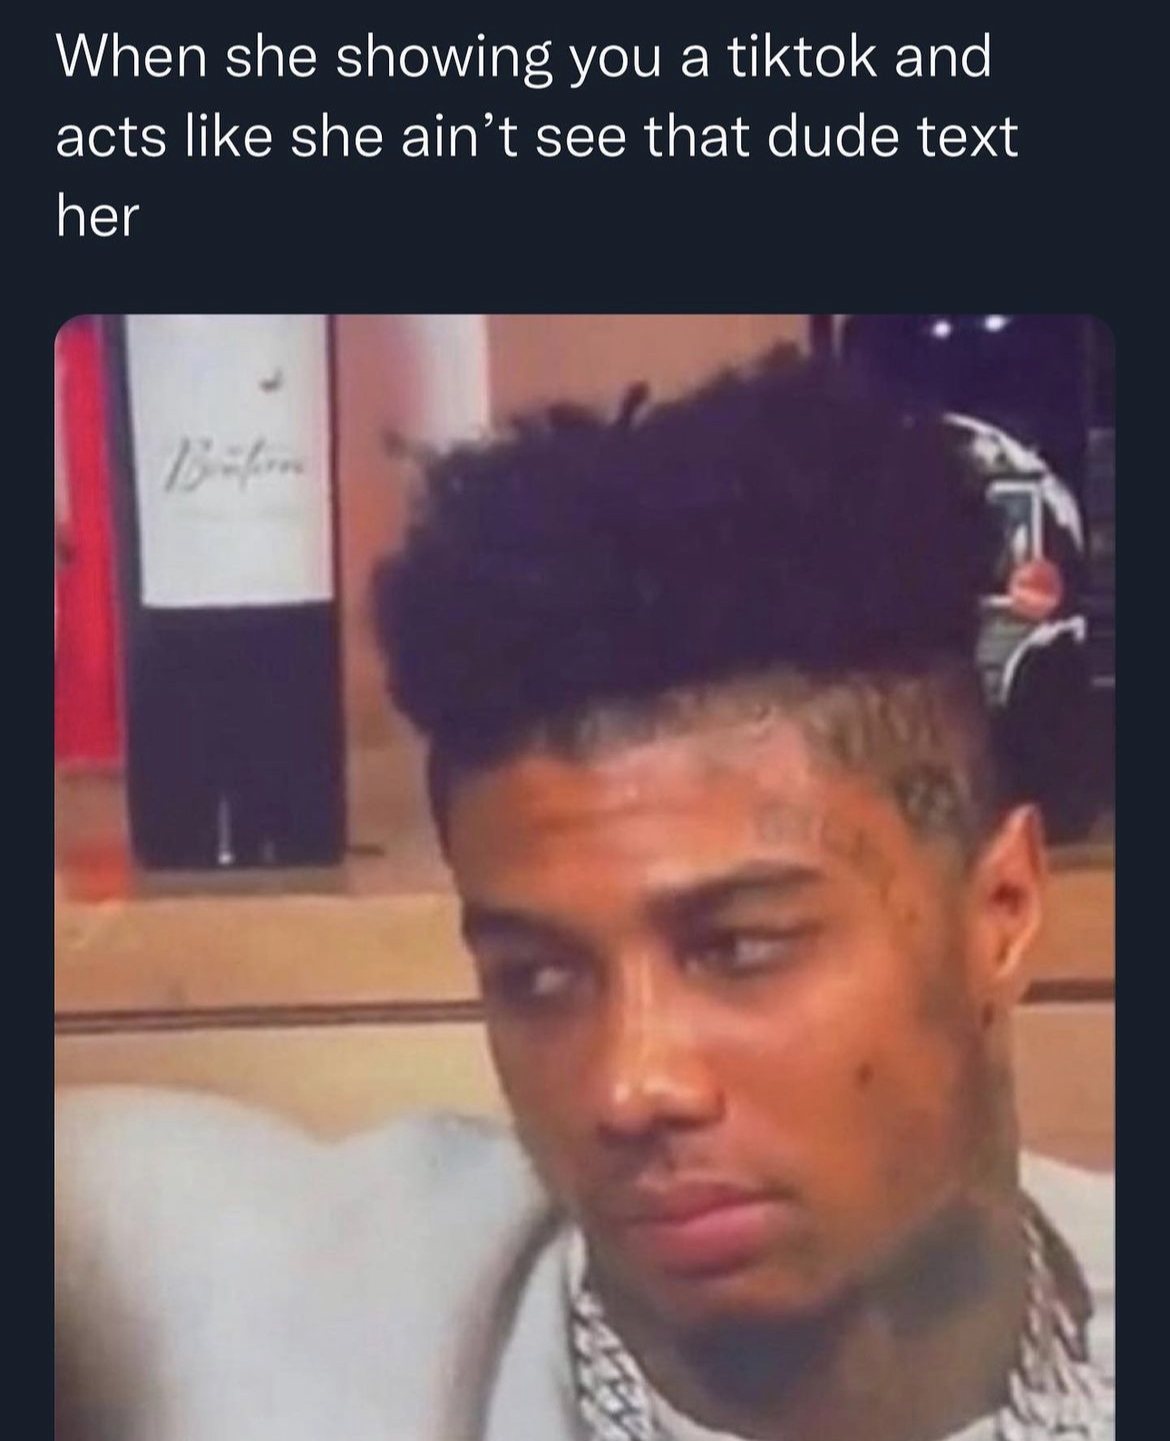 Hoodville memes and captions - photo caption - When she showing you a tiktok and acts she ain't see that dude text her 132